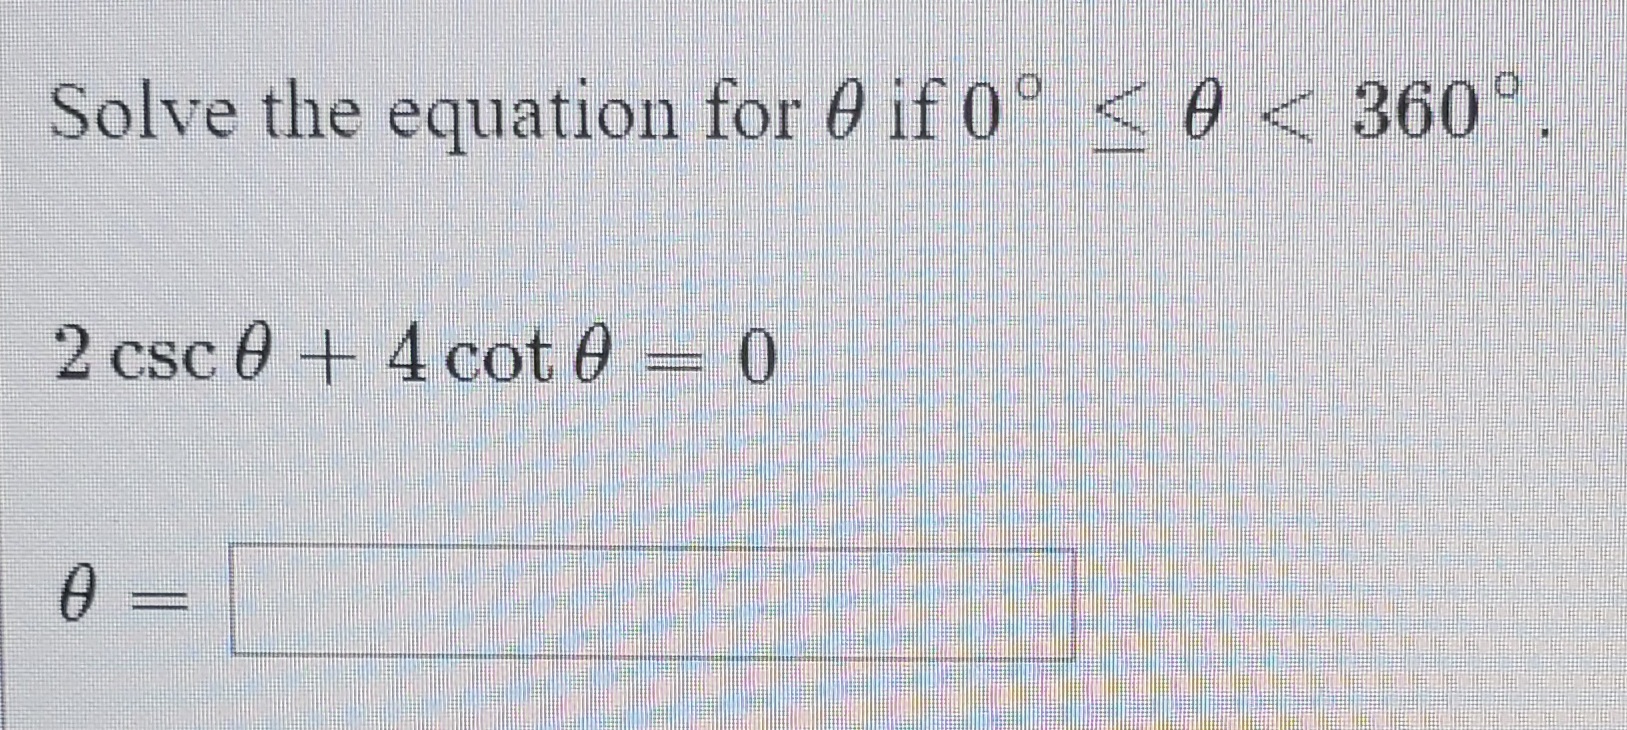 Solve the equation for 0 if 0° < 0 < 360°
2 csc 0 + 4 cot 0 = 0
0 =
